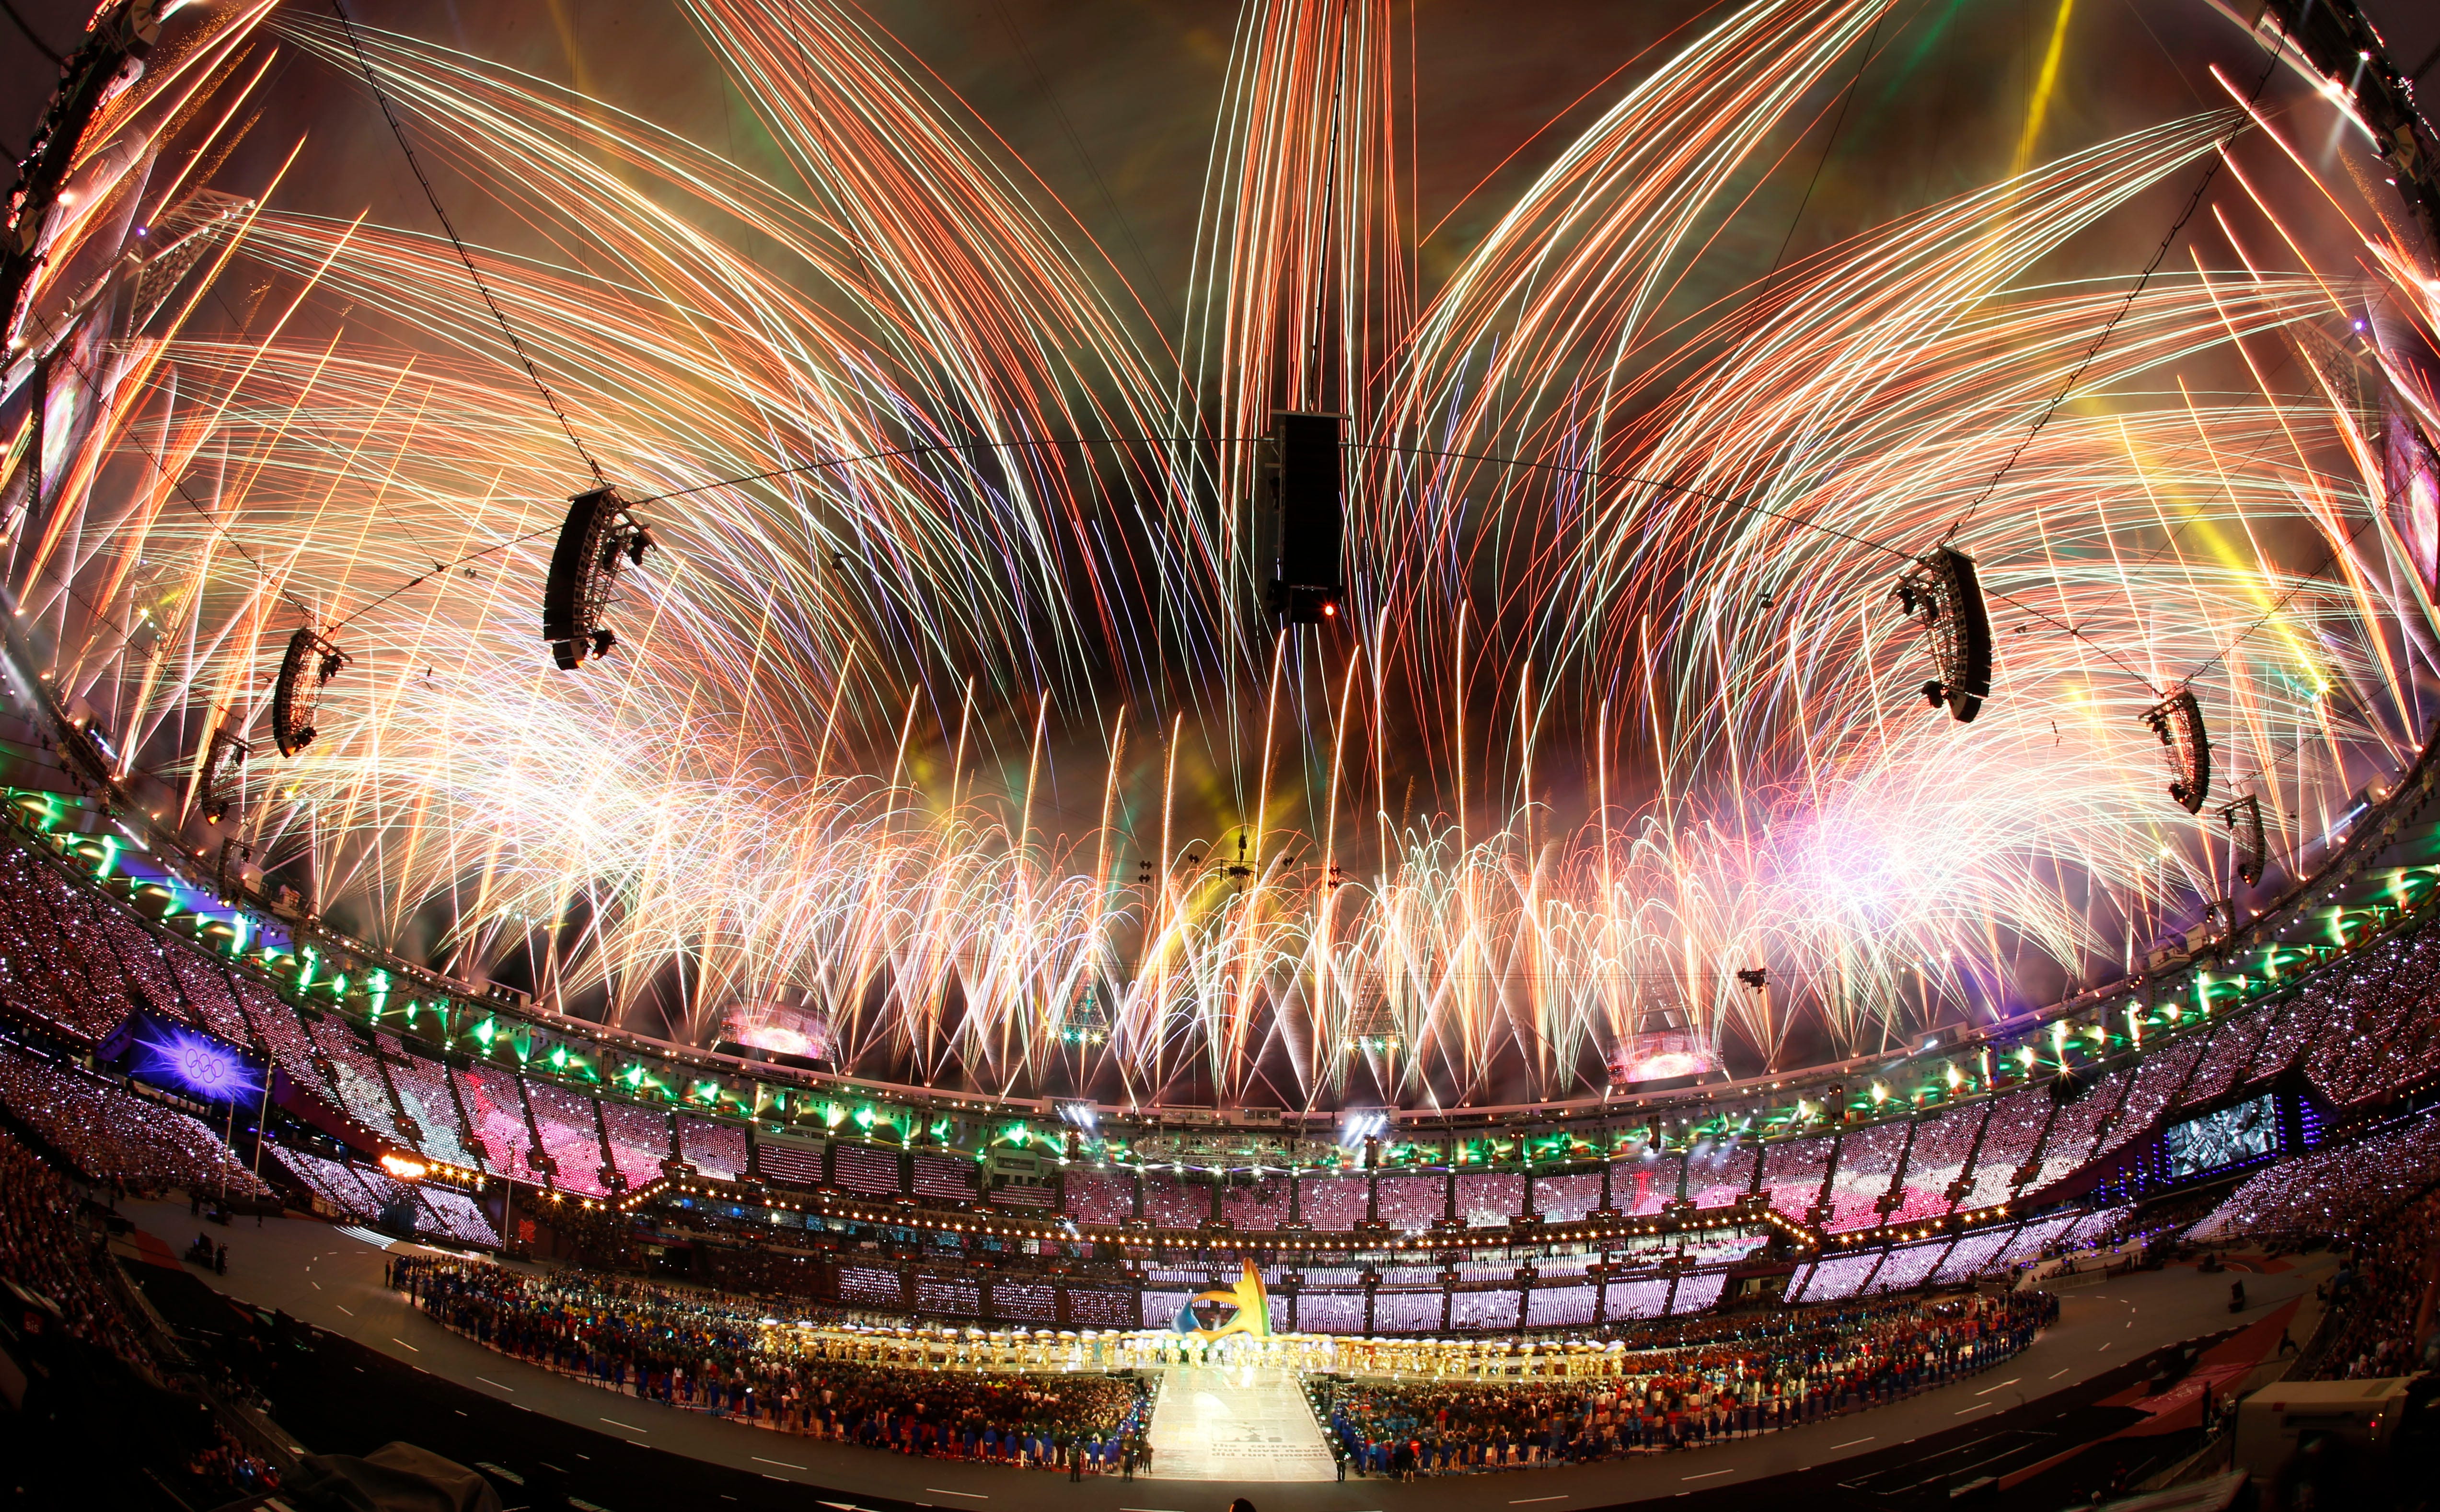 The Best of the London Olympics Closing Ceremony